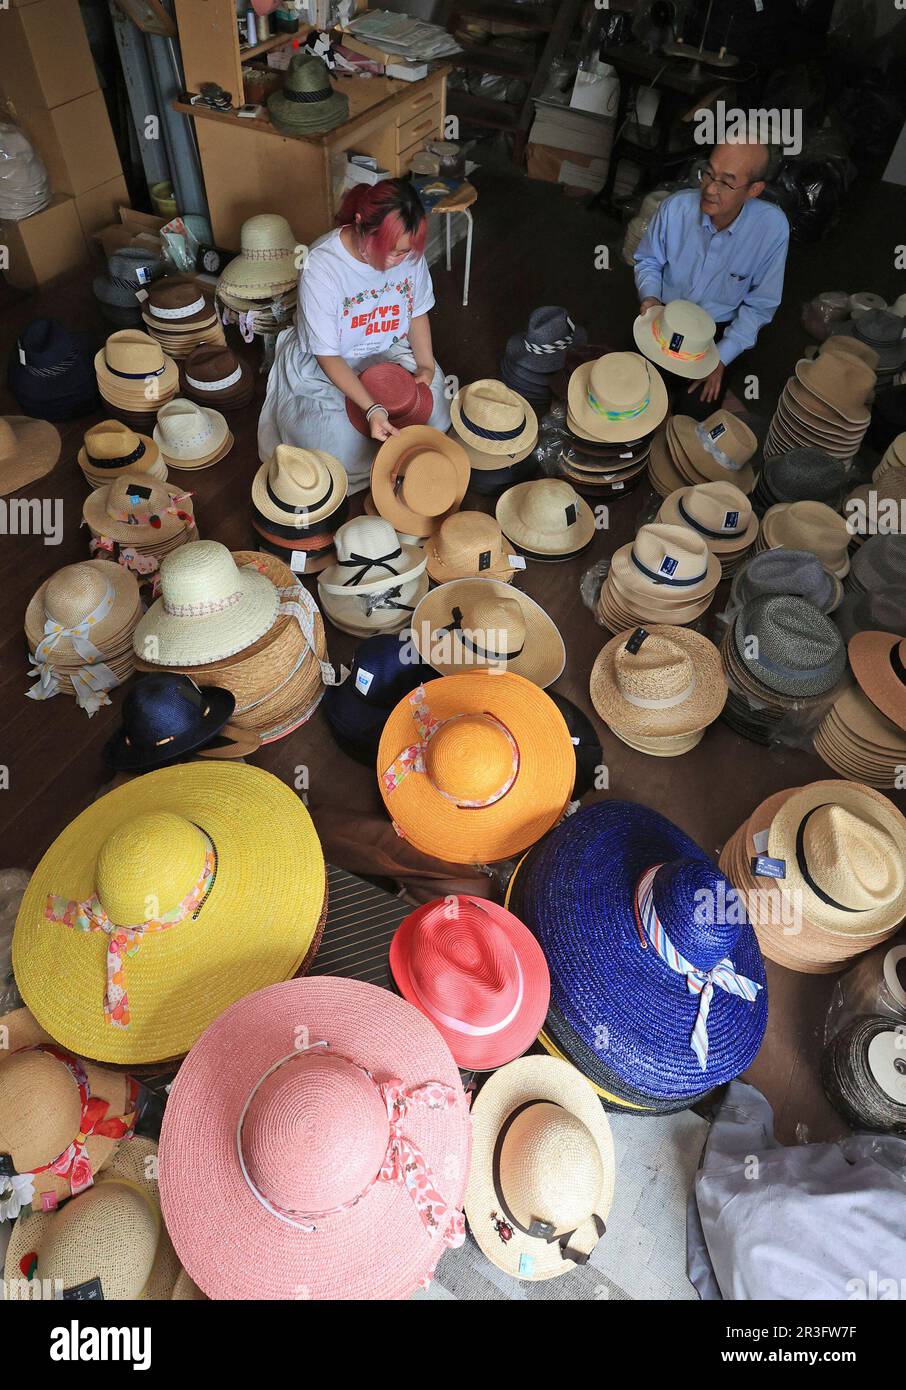 Colorful straw hats are ready to be shipped at Marutaka-seibosho, a hat  manufacturing factory, in Kannonji town, Kagawa Prefecture on May 23, 2022.  Japanese people wear straw hats to fight the humid